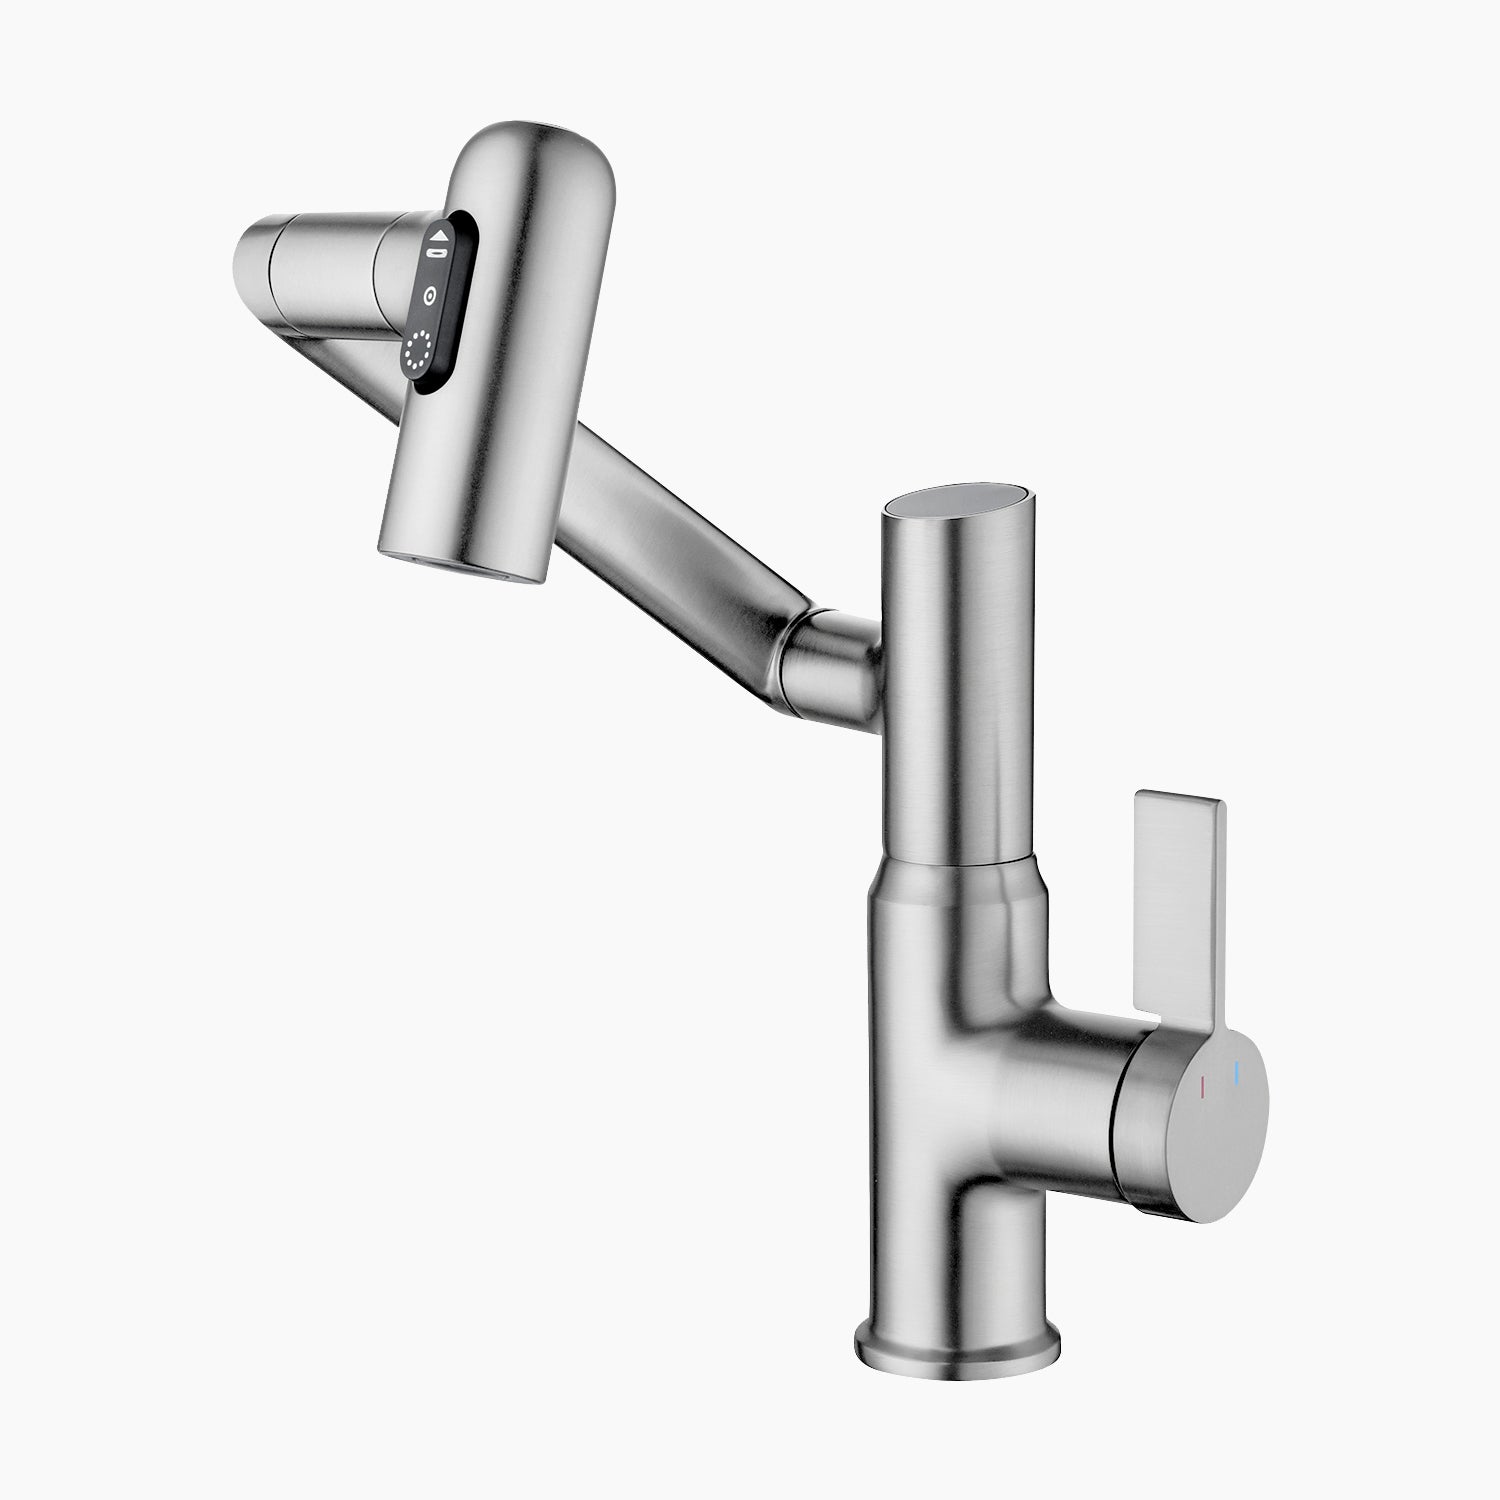 Lefton Single-Hole Rotatable Faucet with Temperature Display-BF2204 -Bathroom Faucets- Lefton Home